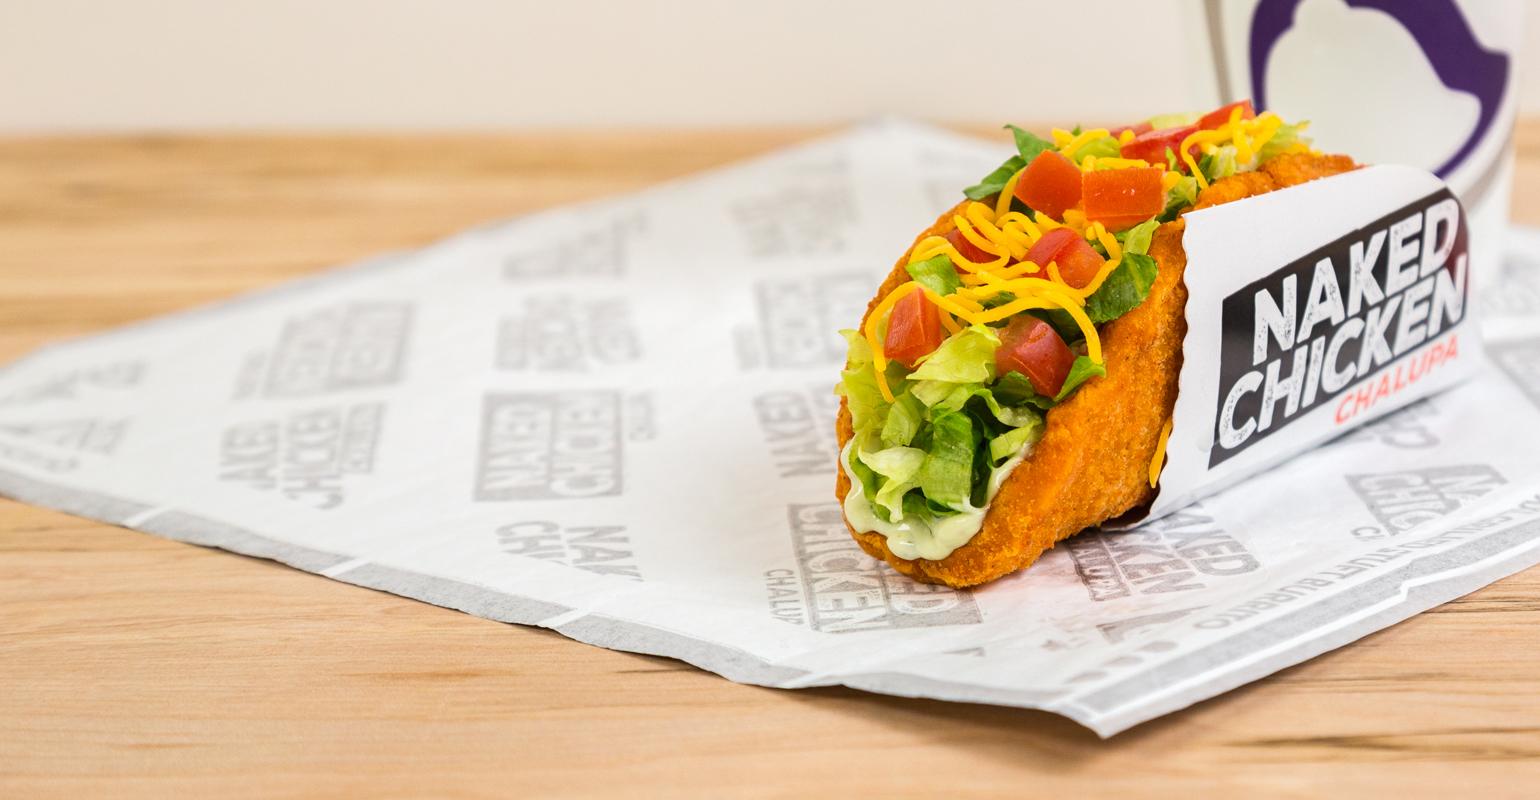 The Naked Chicken Chalupa Is Back At Taco Bell For A 